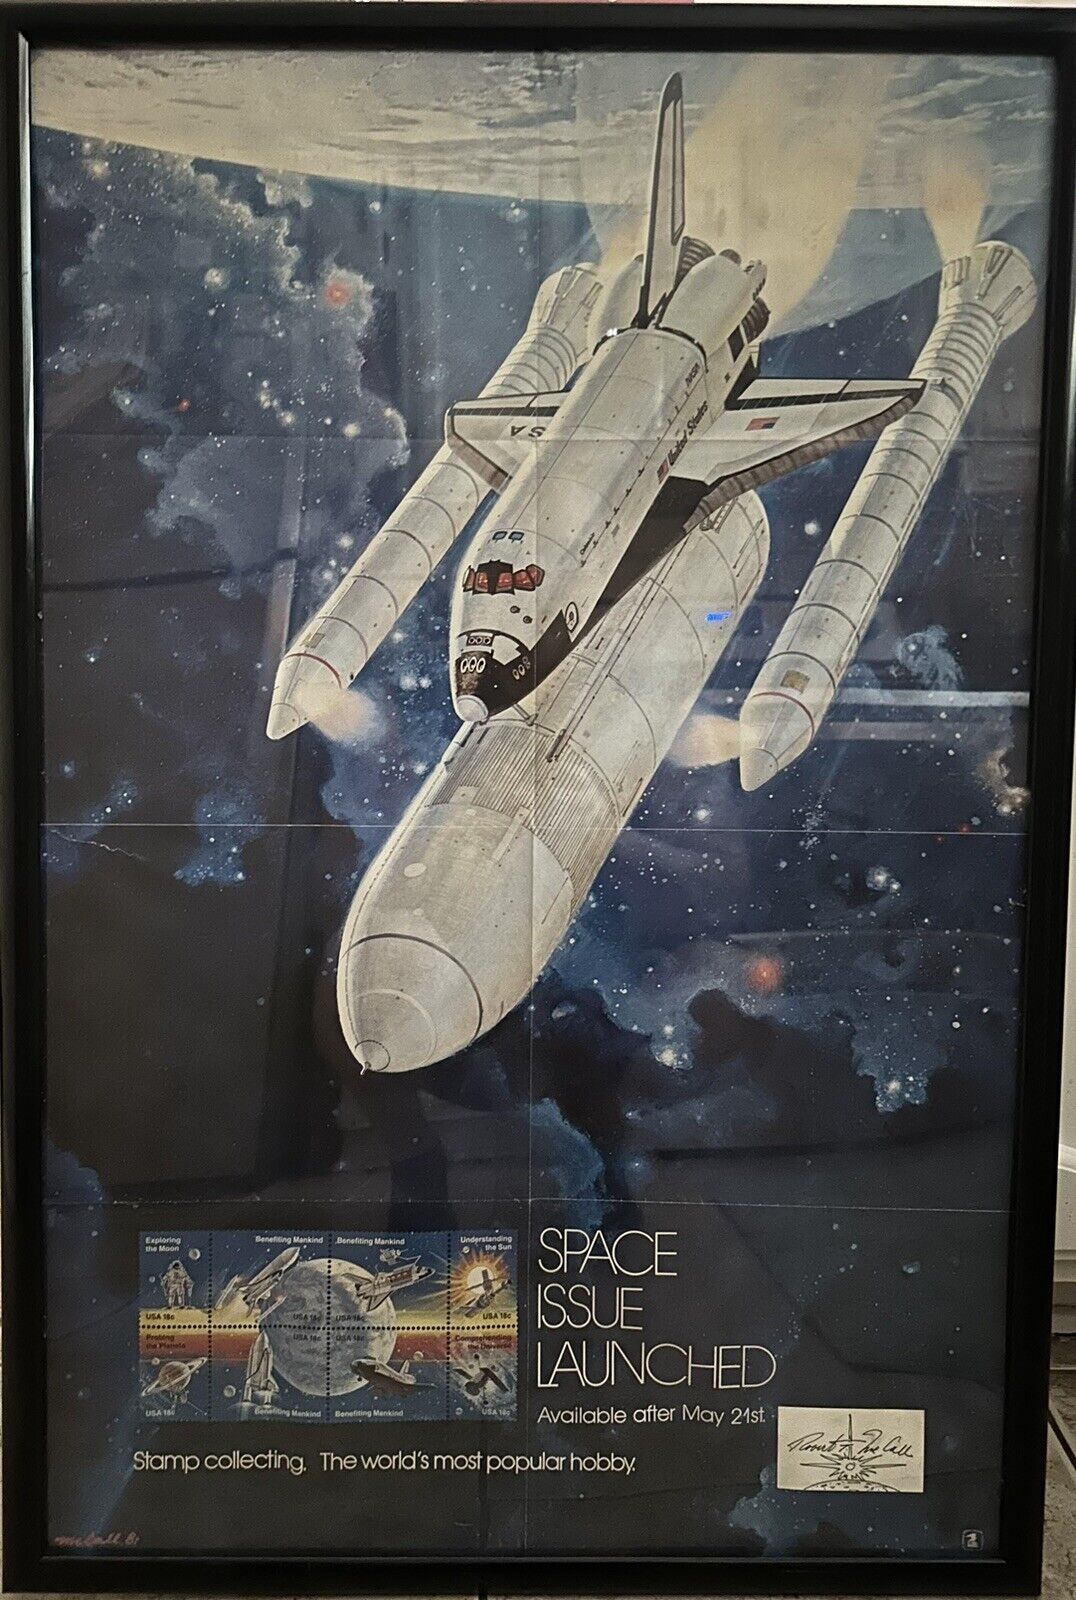 Framed Robert McCall Cut Auto With Space Issue Launched Poster Art USPS